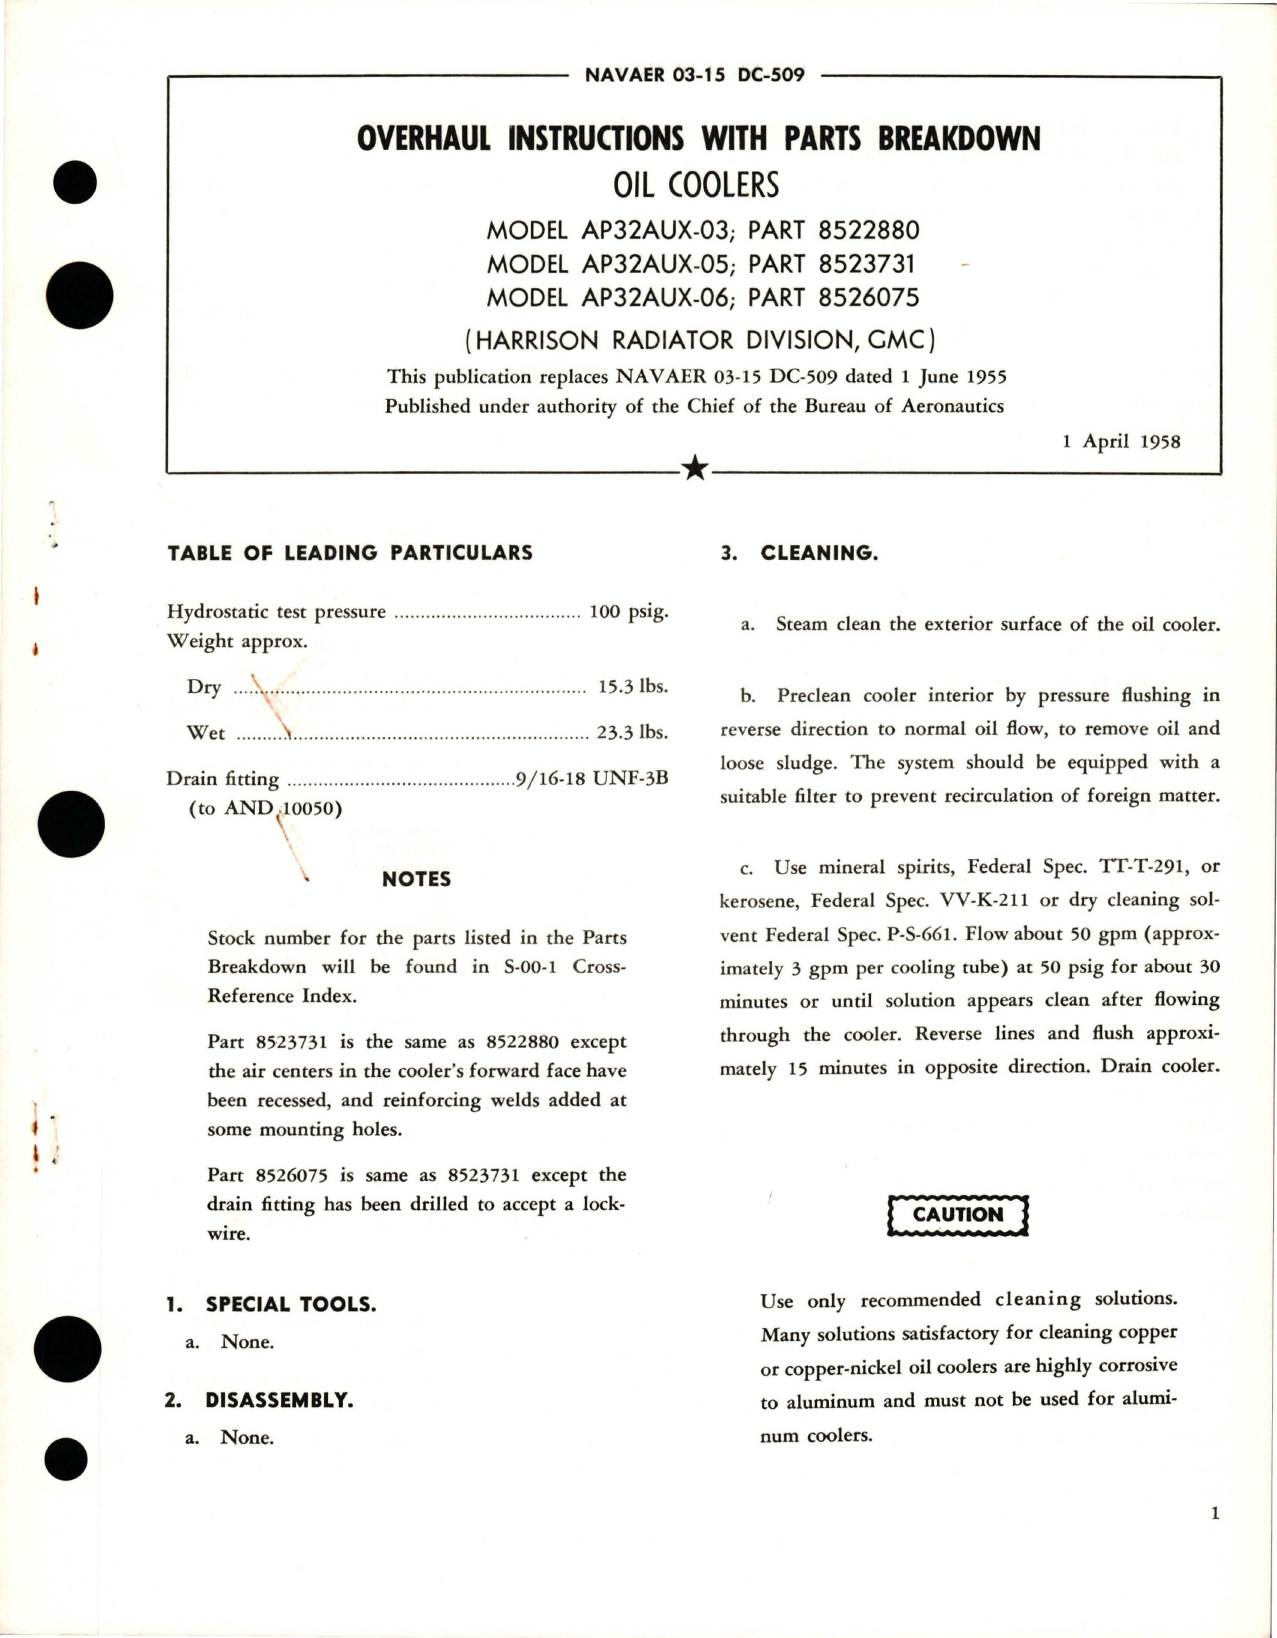 Sample page 1 from AirCorps Library document: Overhaul Instructions with Parts Breakdown for Oil Coolers - Model AP32AUX-03, AP32AUX-05, and AP32AUX-06